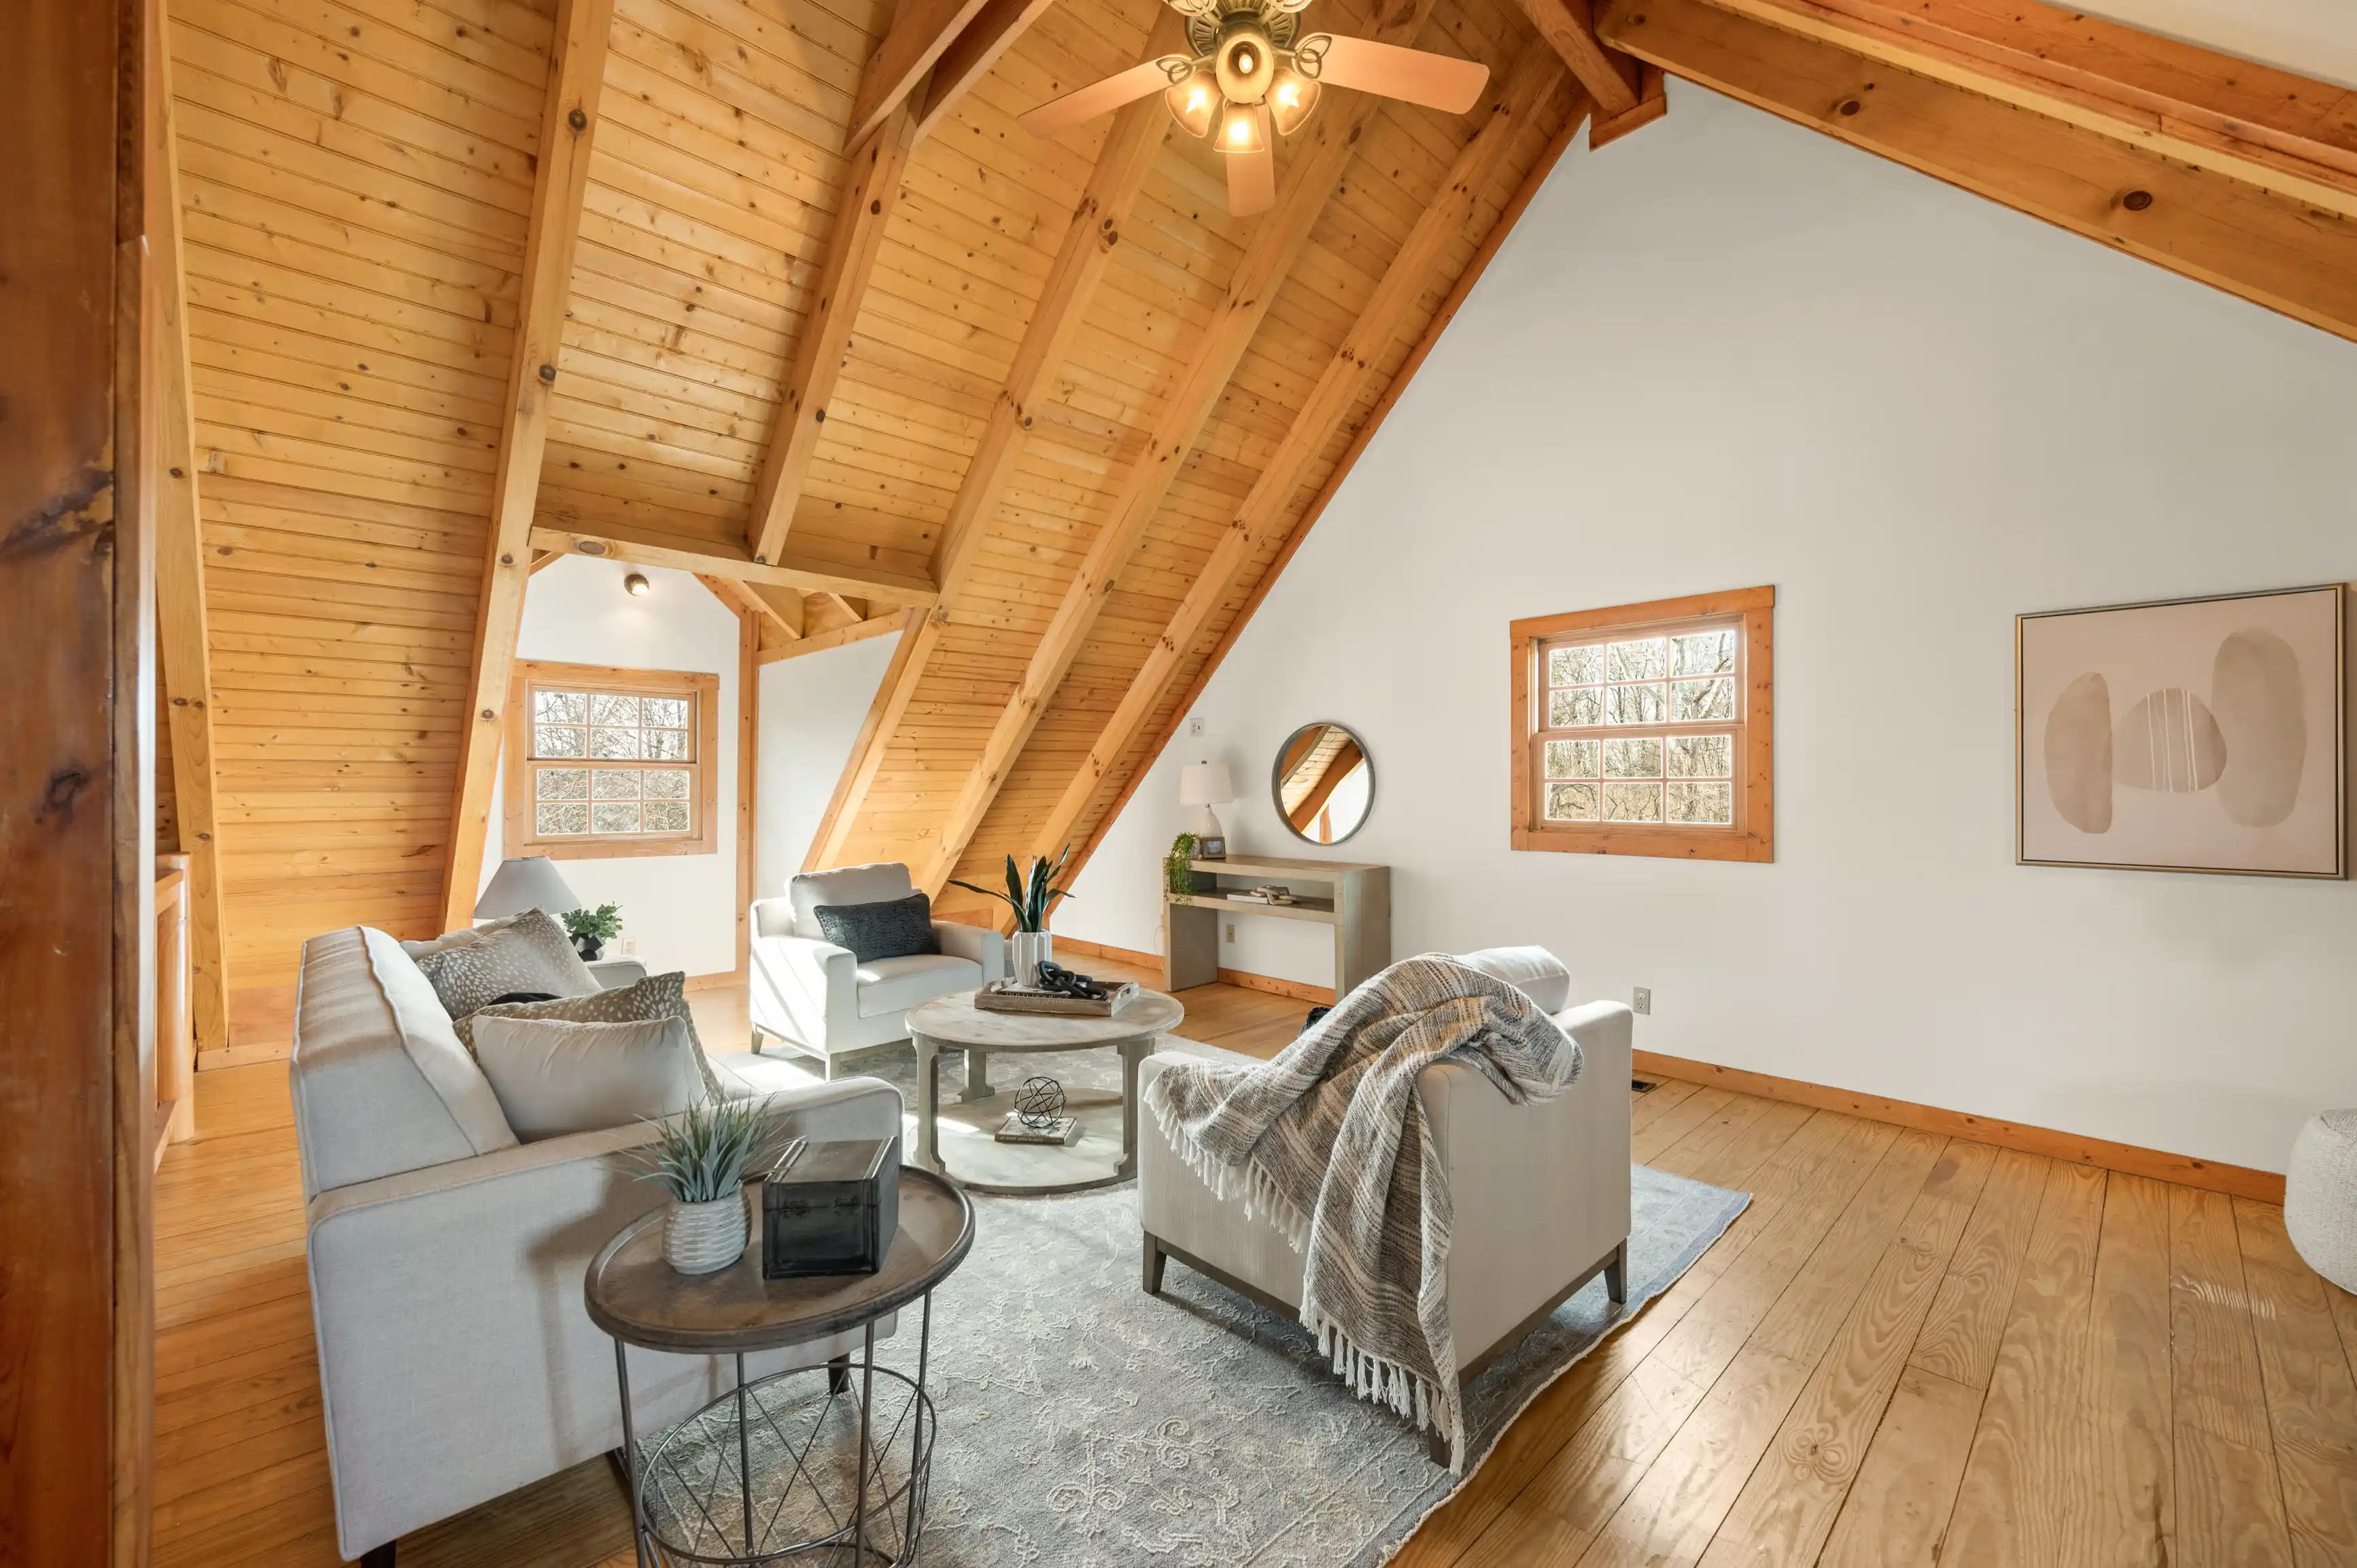 Cozy attic living room with wooden beam ceiling, hardwood floors, neutral toned furniture, and decorative accents.